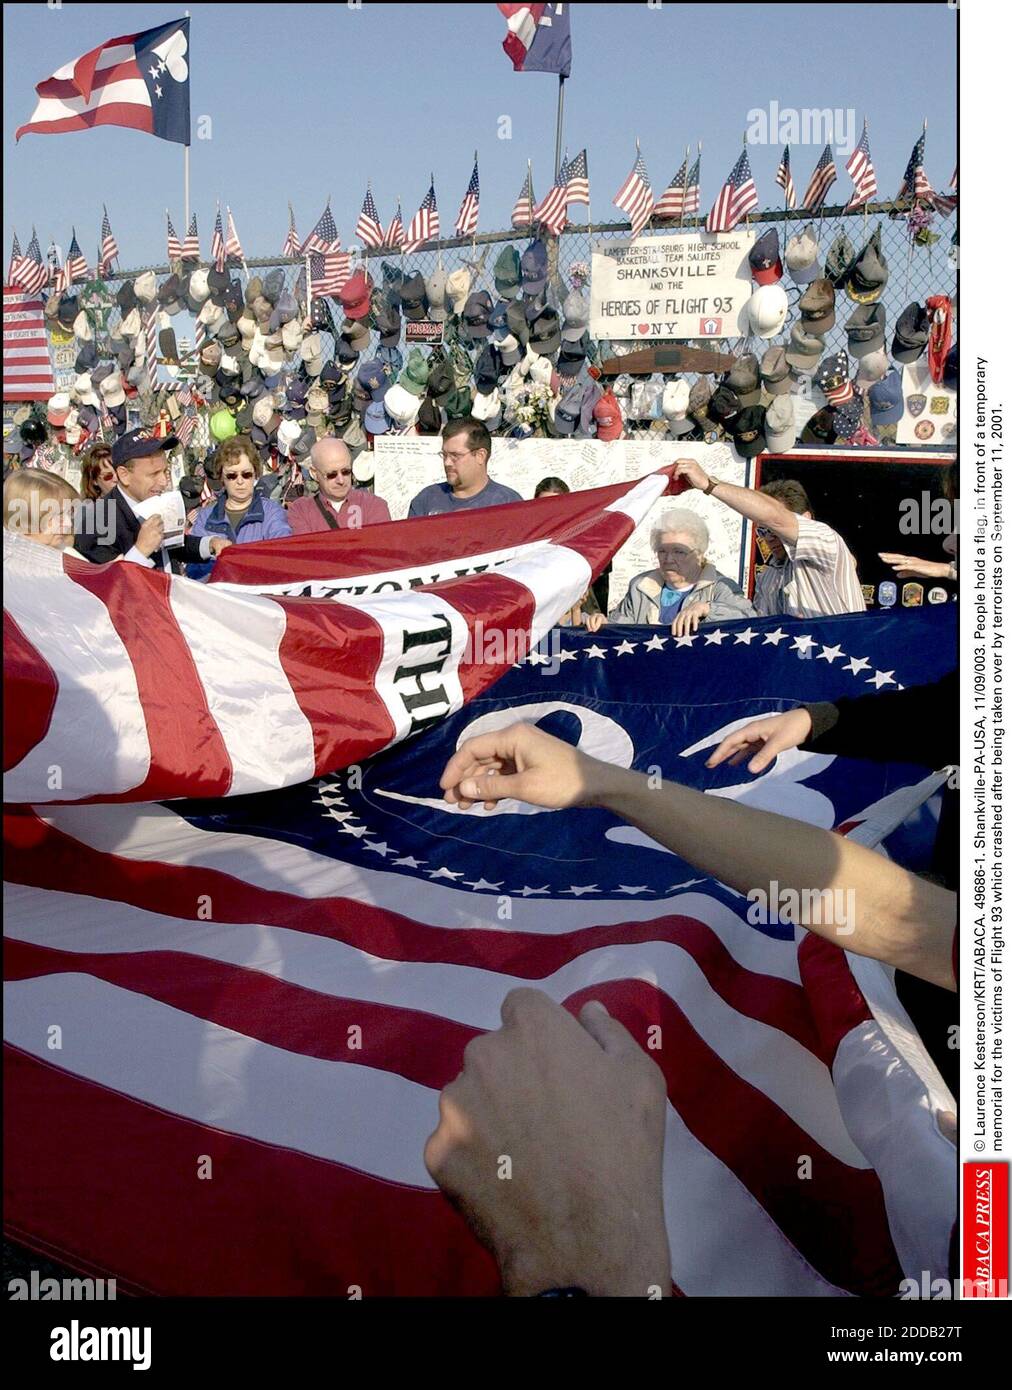 NO FILM, NO VIDEO, NO TV, NO DOCUMENTARY - © Laurence Kesterson/KRT/ABACA. 49686-1. Shankville-PA-USA, 11/09/003. People hold a flag, in front of a temporary memorial for the victims of Flight 93 which crashed after being taken over by terrorists on September 11, 2001. Stock Photo